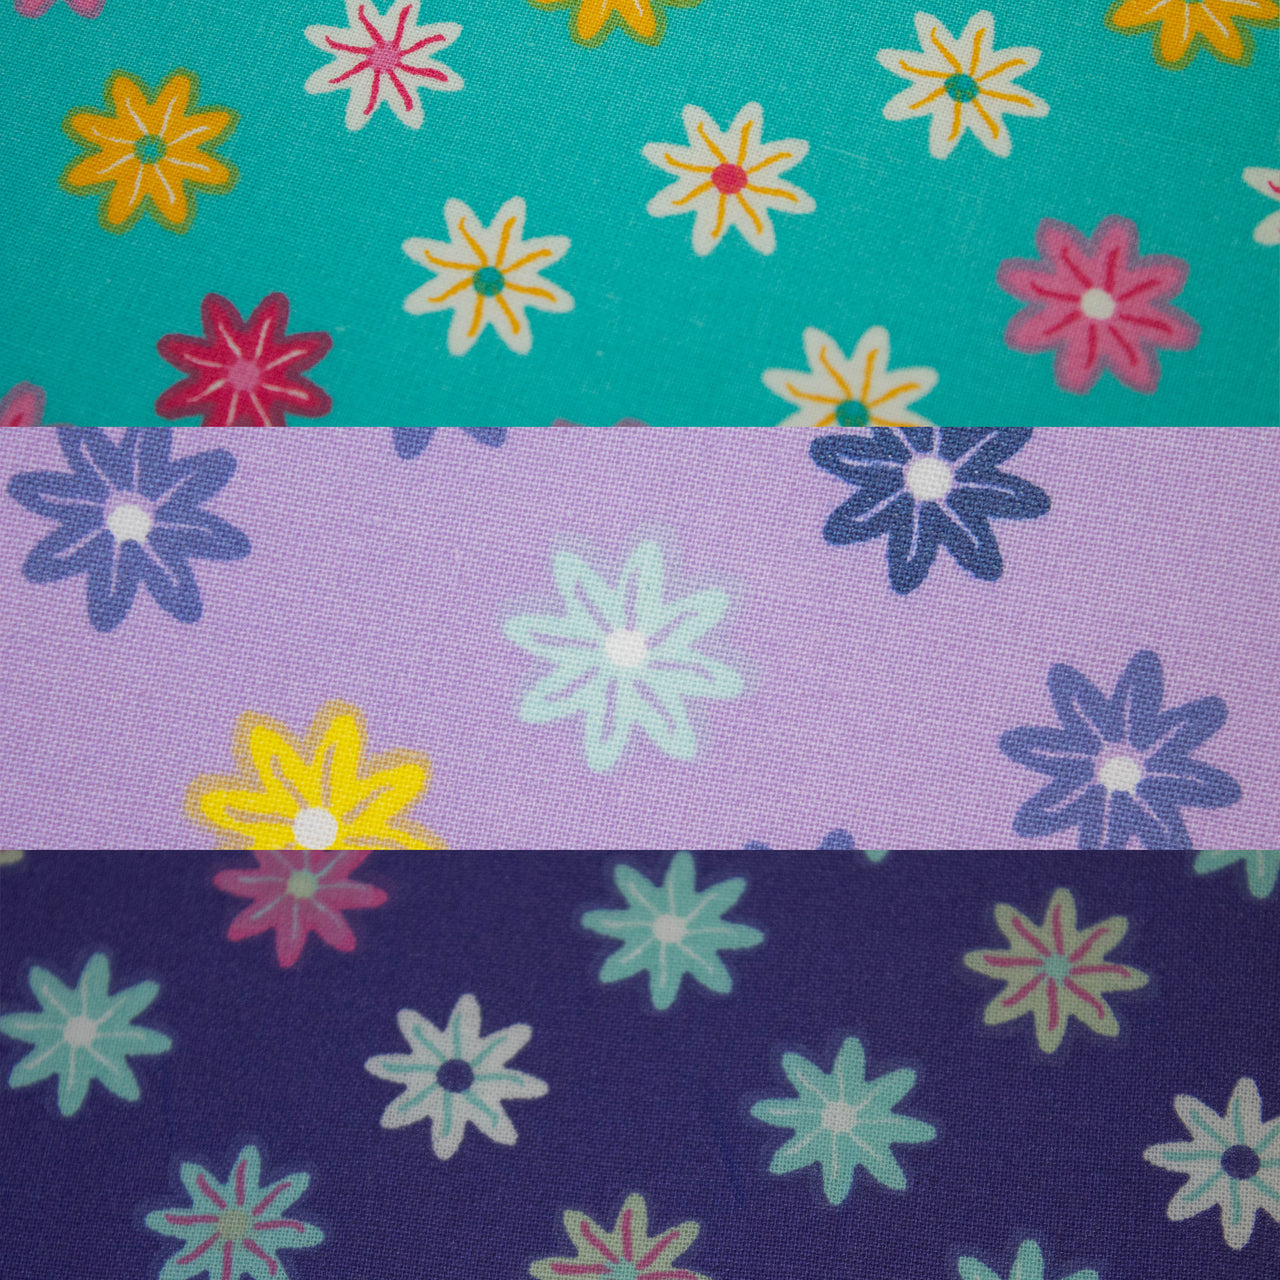 Starburst Flower Design on Printed Cotton Fabric - Available in 3 colourways